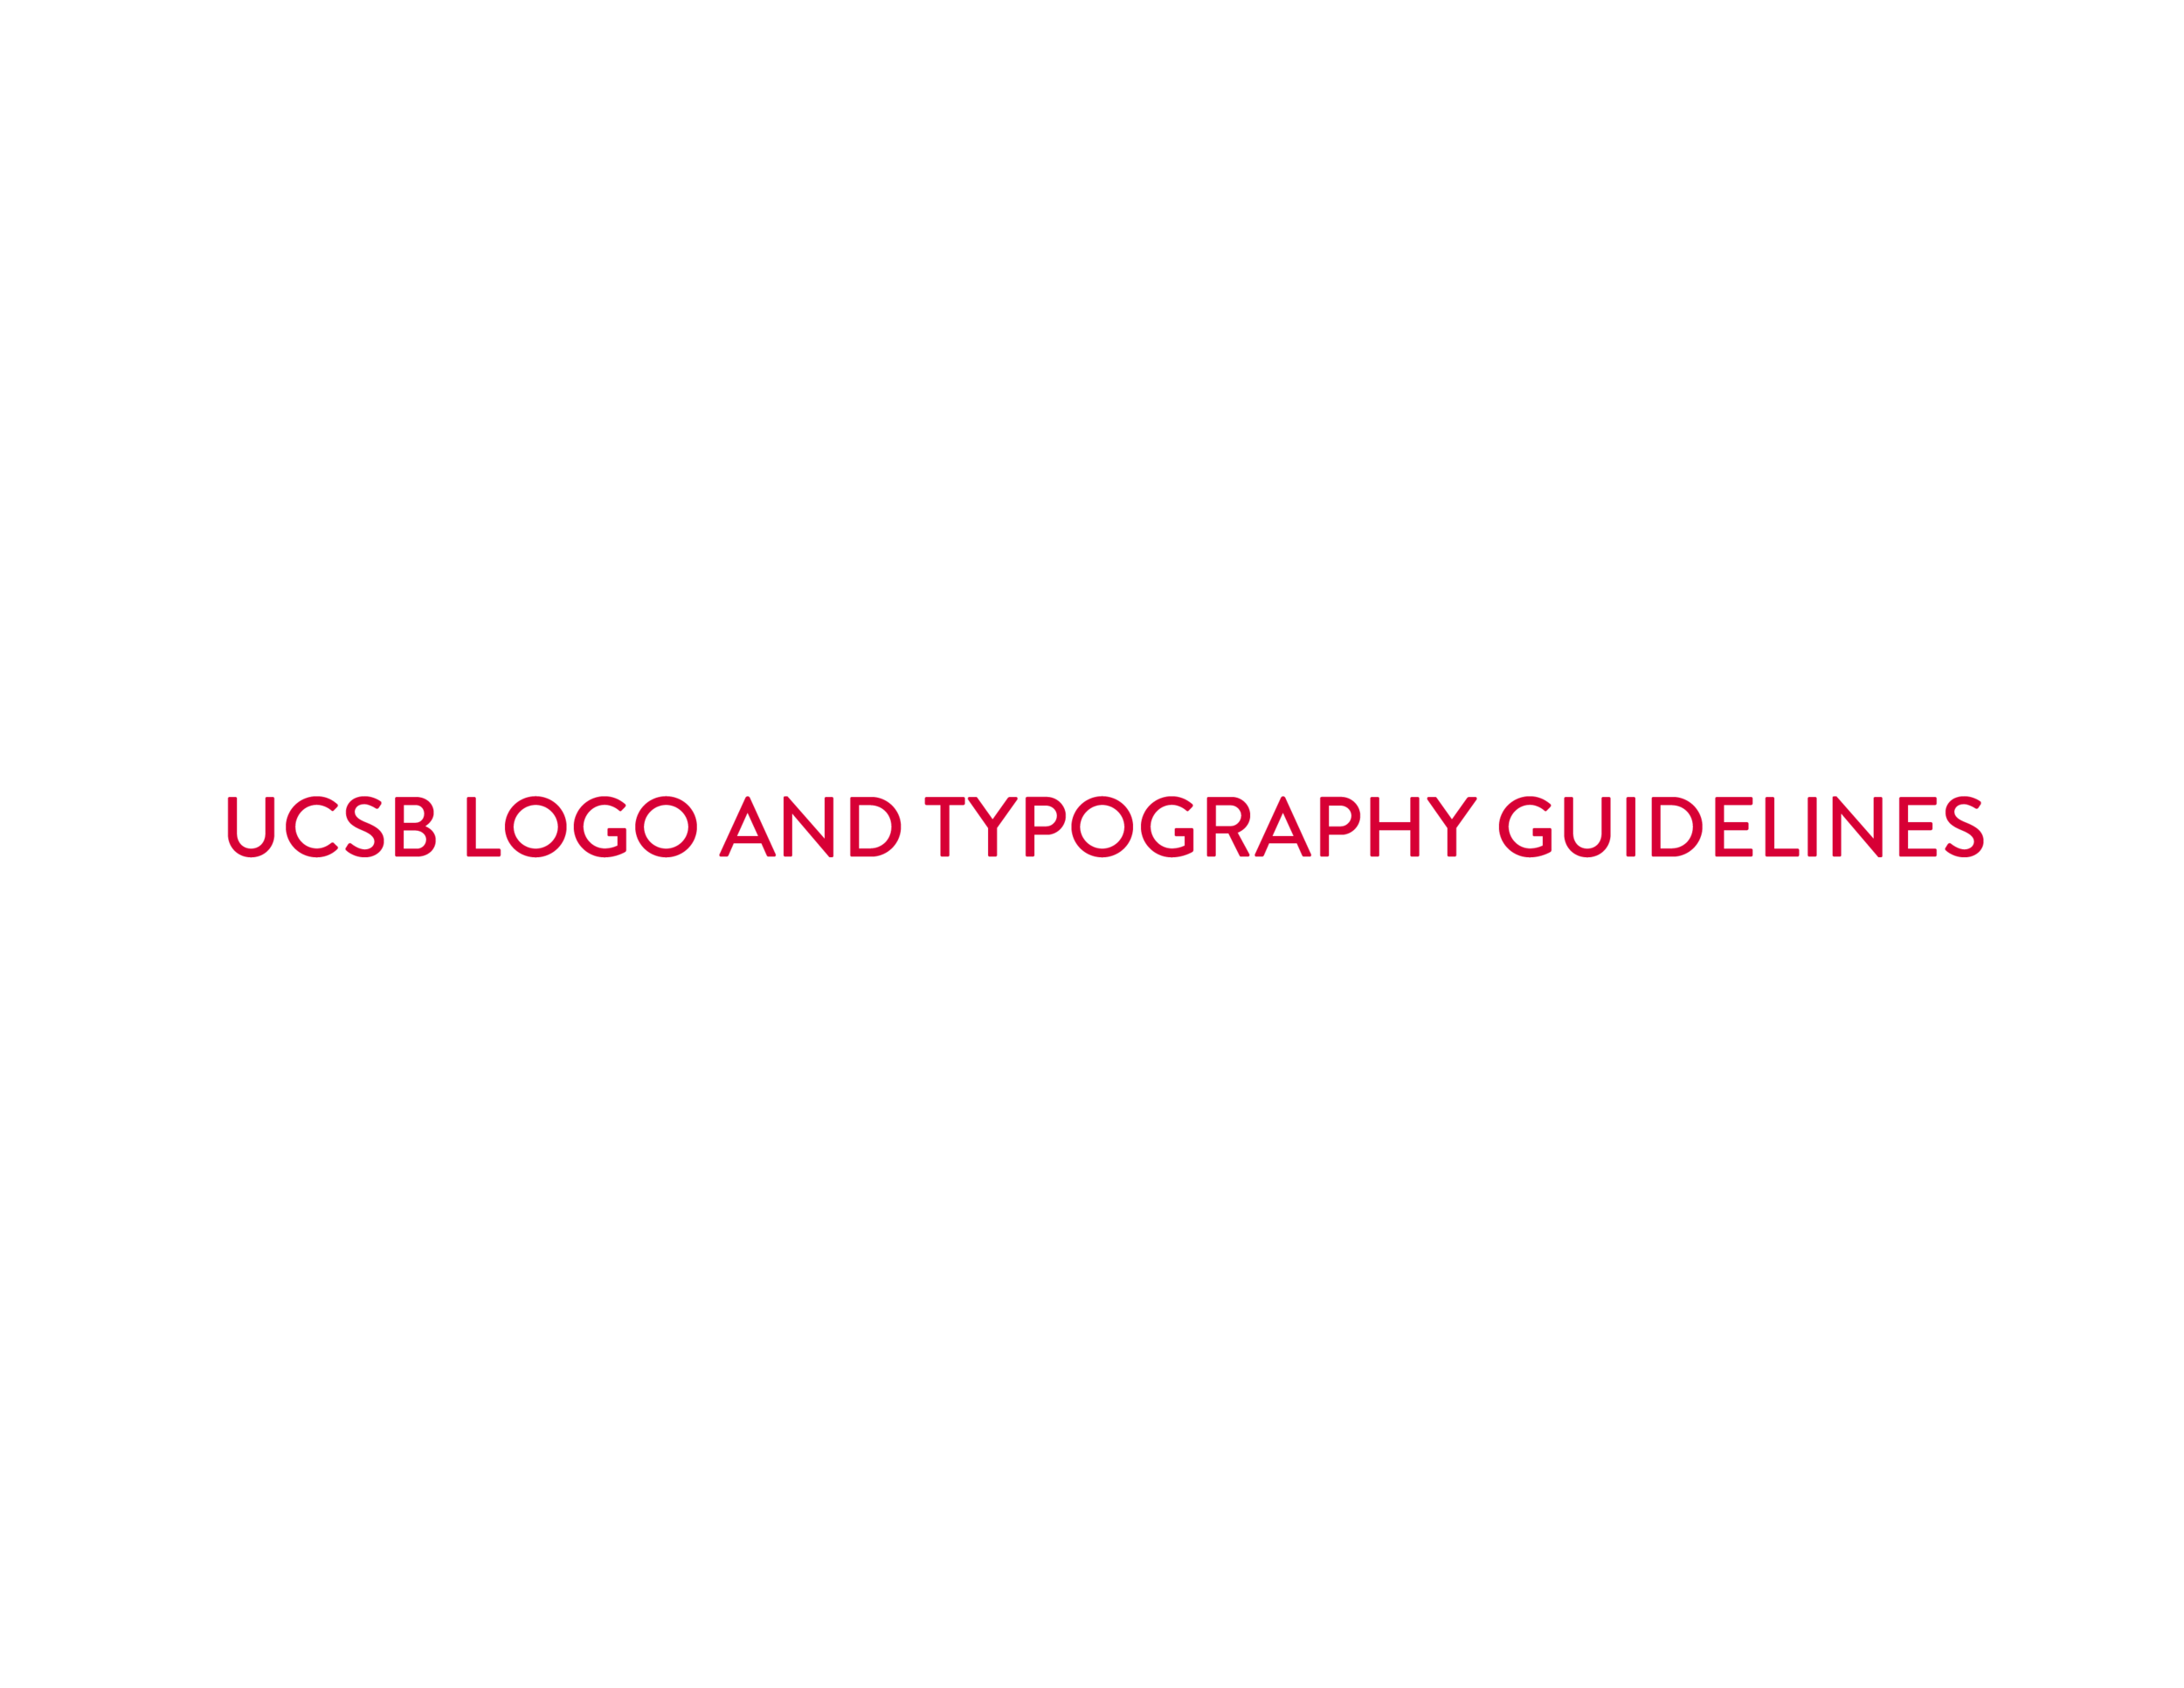 ucsb guidelines new logo and font use FINAL-02.png